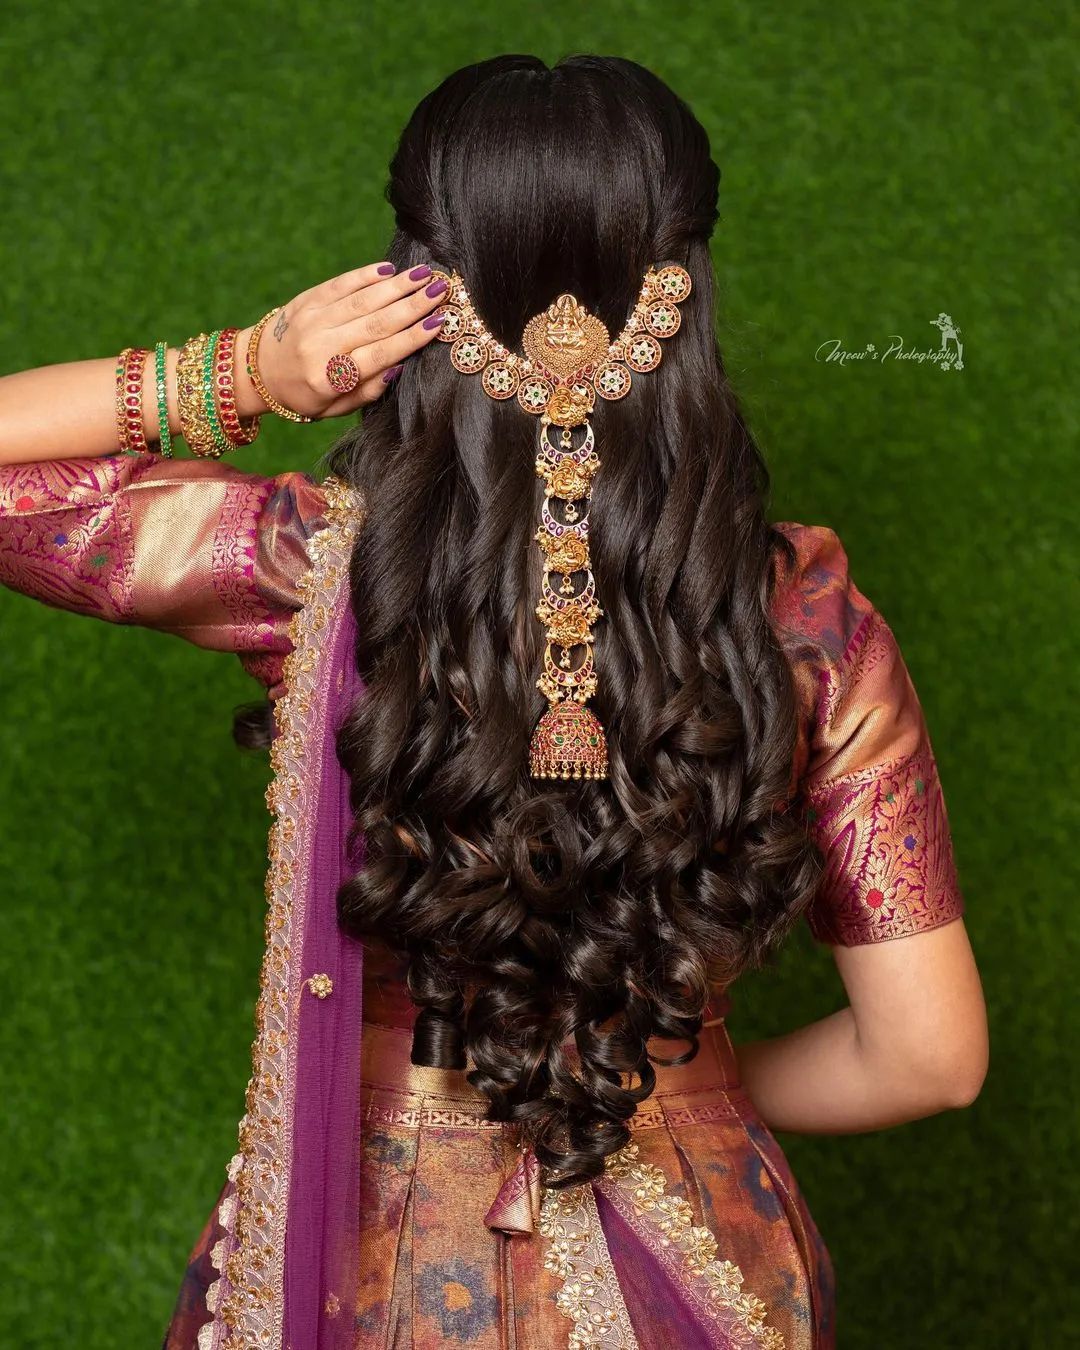 Wedding Hairstyle: Stunning Ideas for Your Big Day